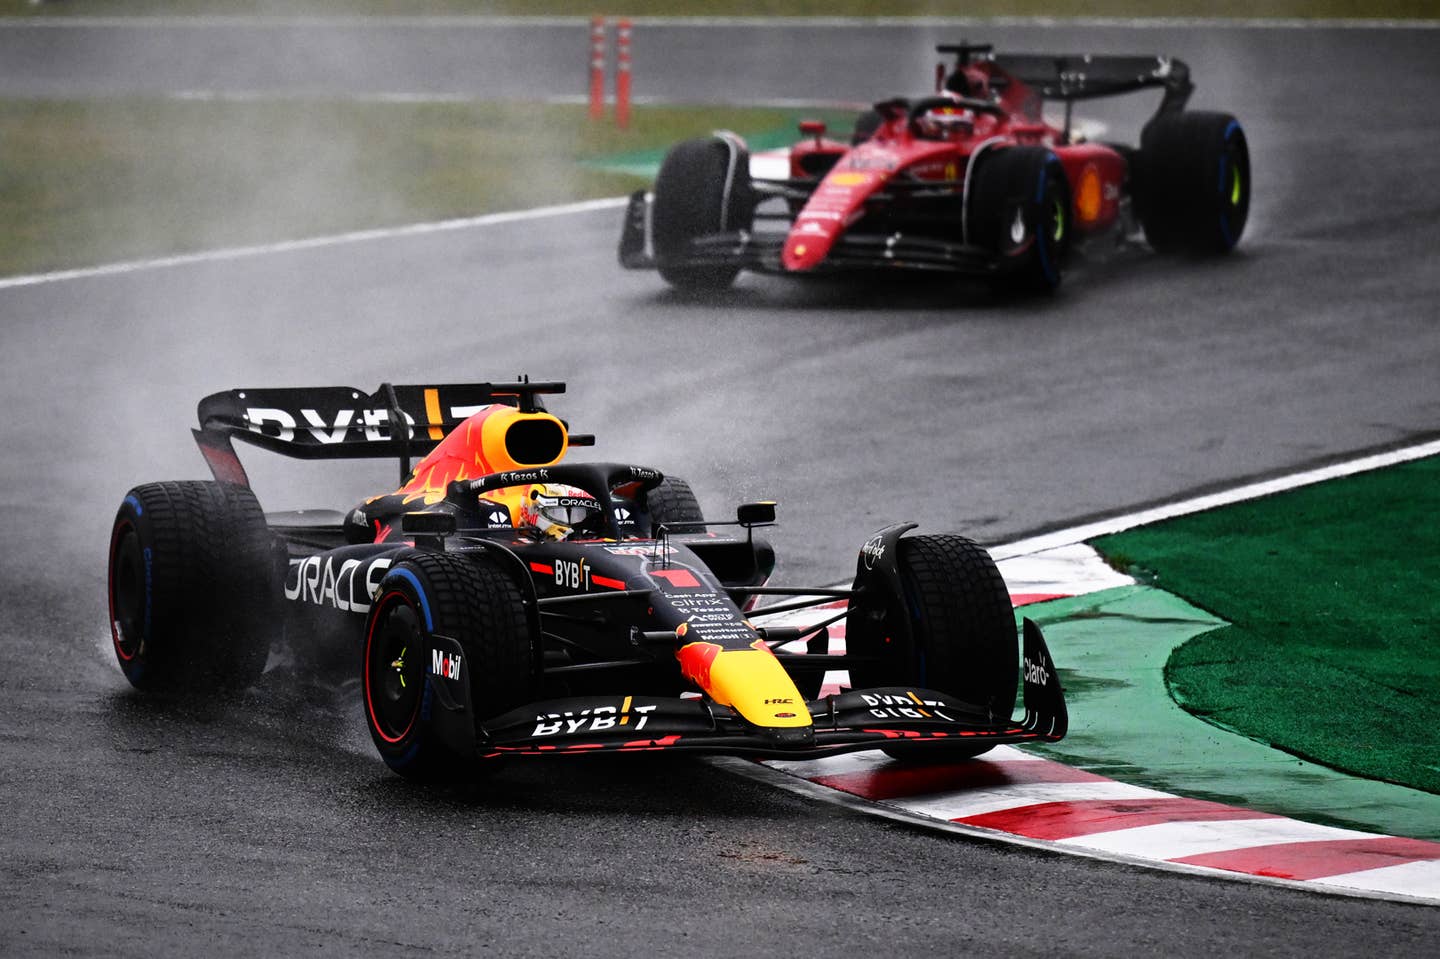 Max Verstappen leading Charles Leclerc | Photo by Clive Mason/Getty Images